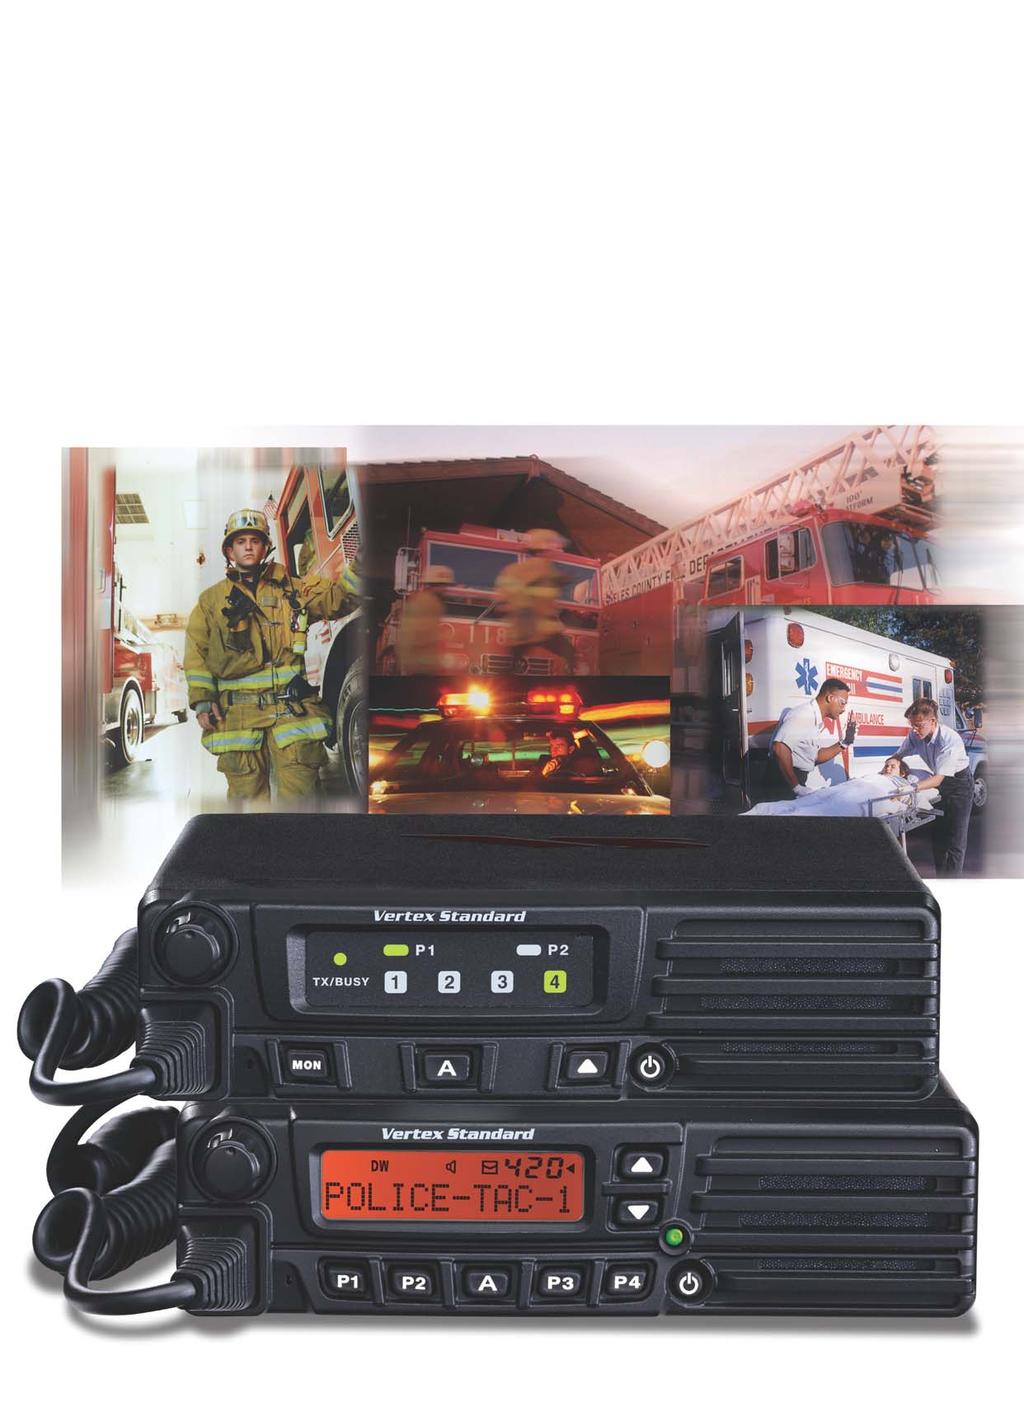 VX-4100E/VX-4200E SERIES Public Safety applications require three essential elements: reliability, ruggedness, and performance versatility.